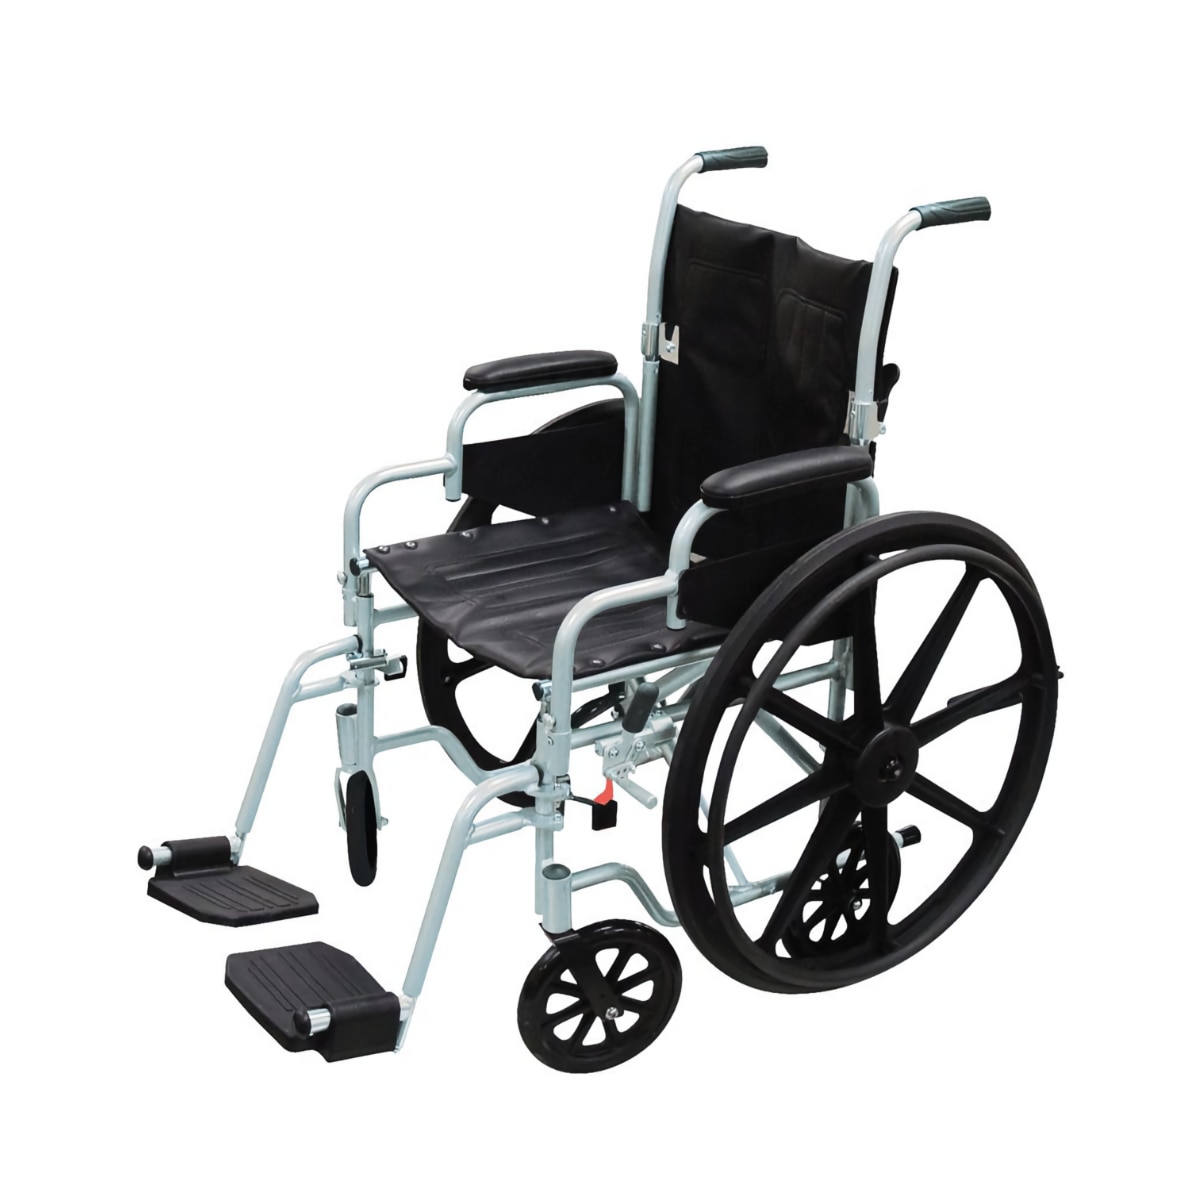 Drive PolyFly wheelchair & transport chair with a silver frame and black accents